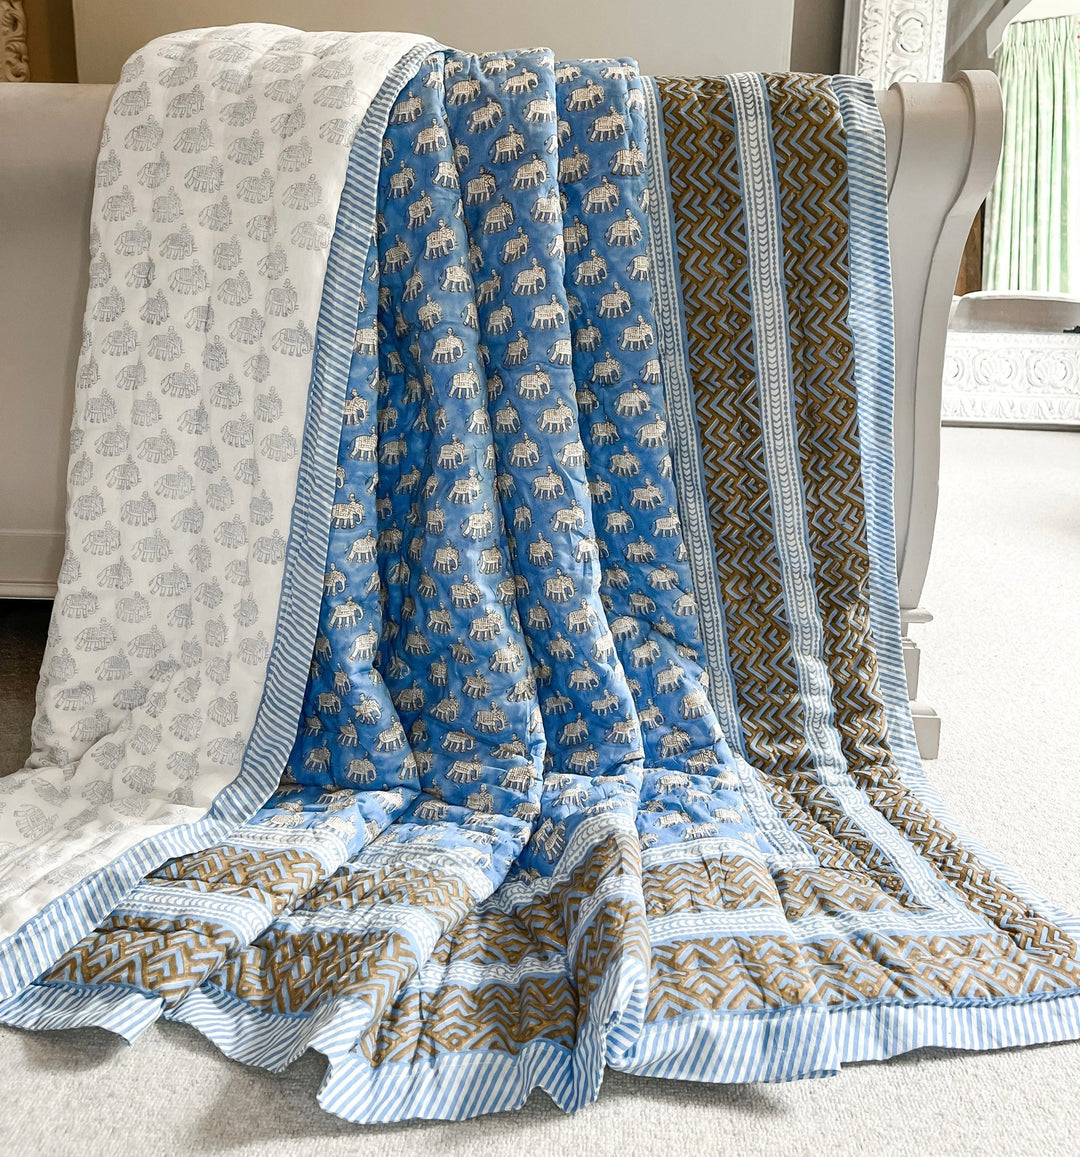 Handmade king size block print blue quilt from India. Blue elephant quilt with chevron border and blue pinstripe border. Reversible. Machine washable. Bombaby.